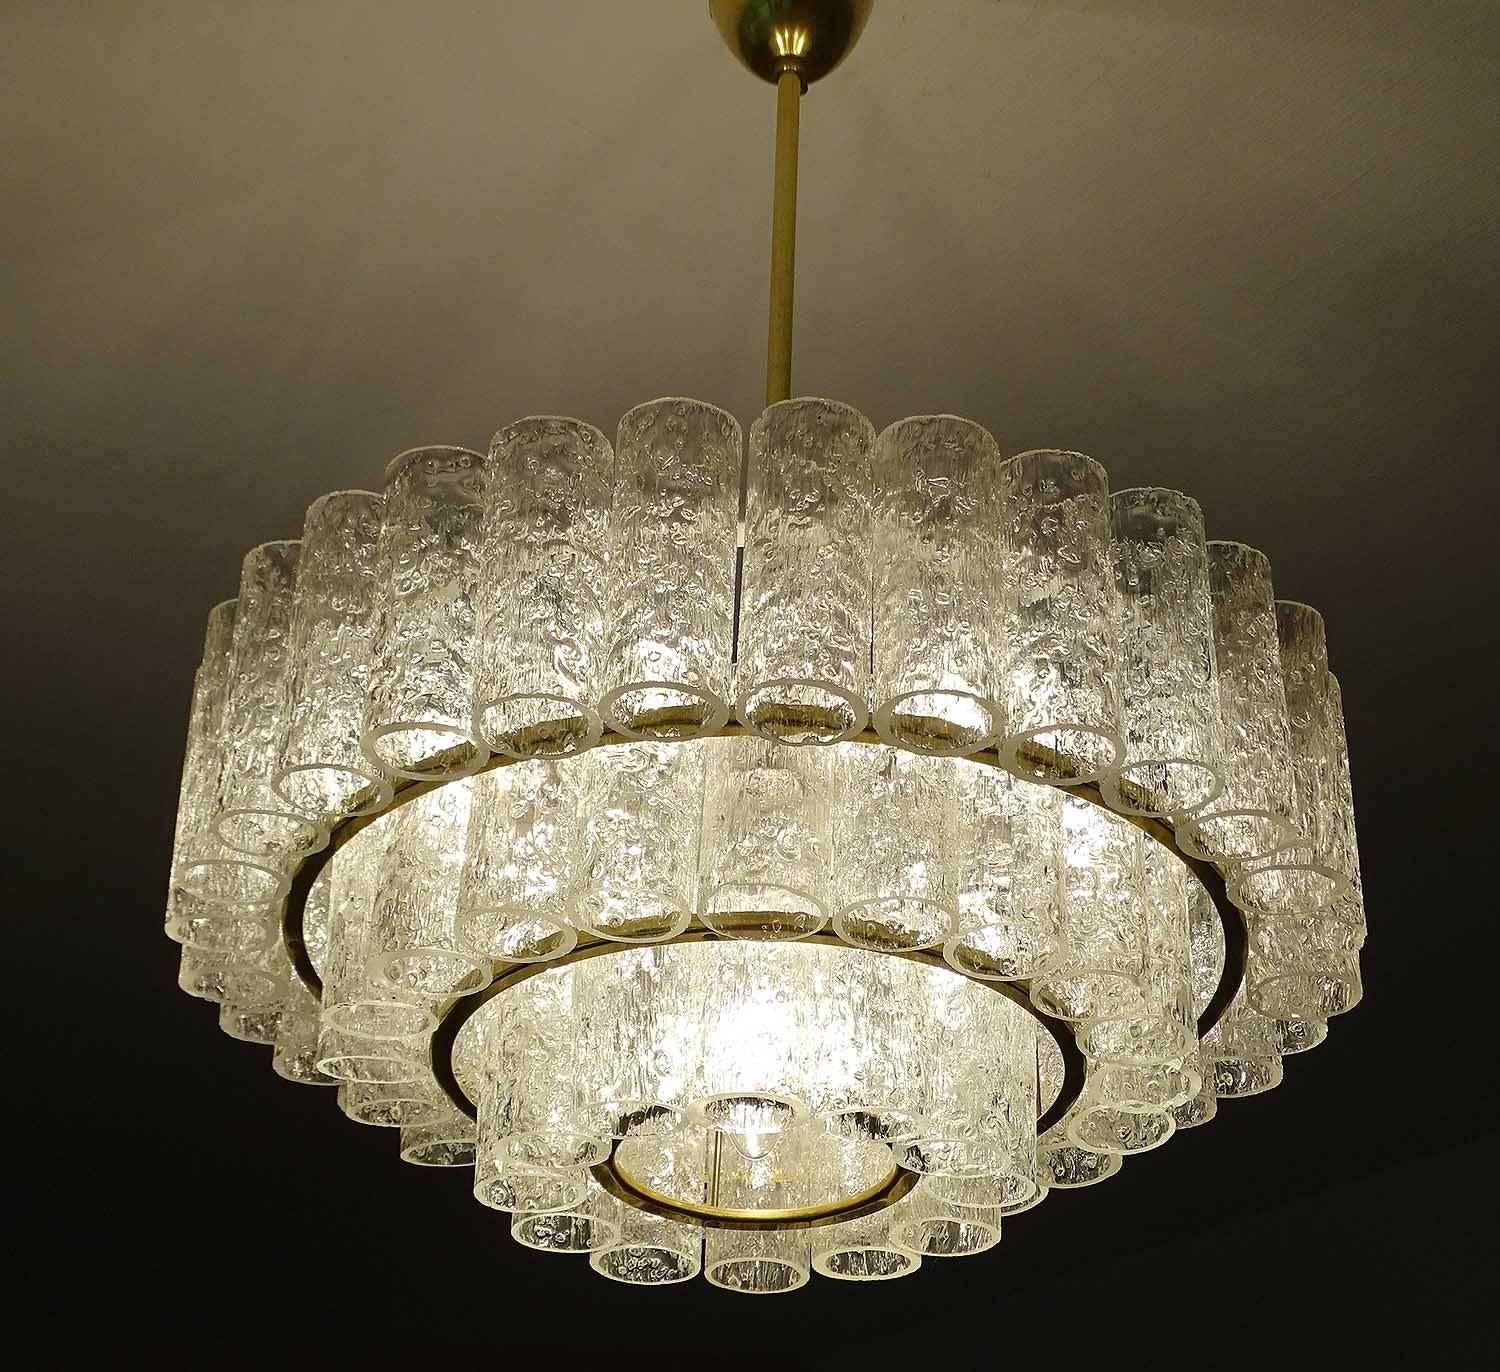 Doria chandelier, three-tier structure with Murano glass tubes, each tier punctuated with a brass ring. This is a variation of the model 4126, which received the prestigious German design excellence award IF (Industrieform) in 1968.
22.83 in H / 58